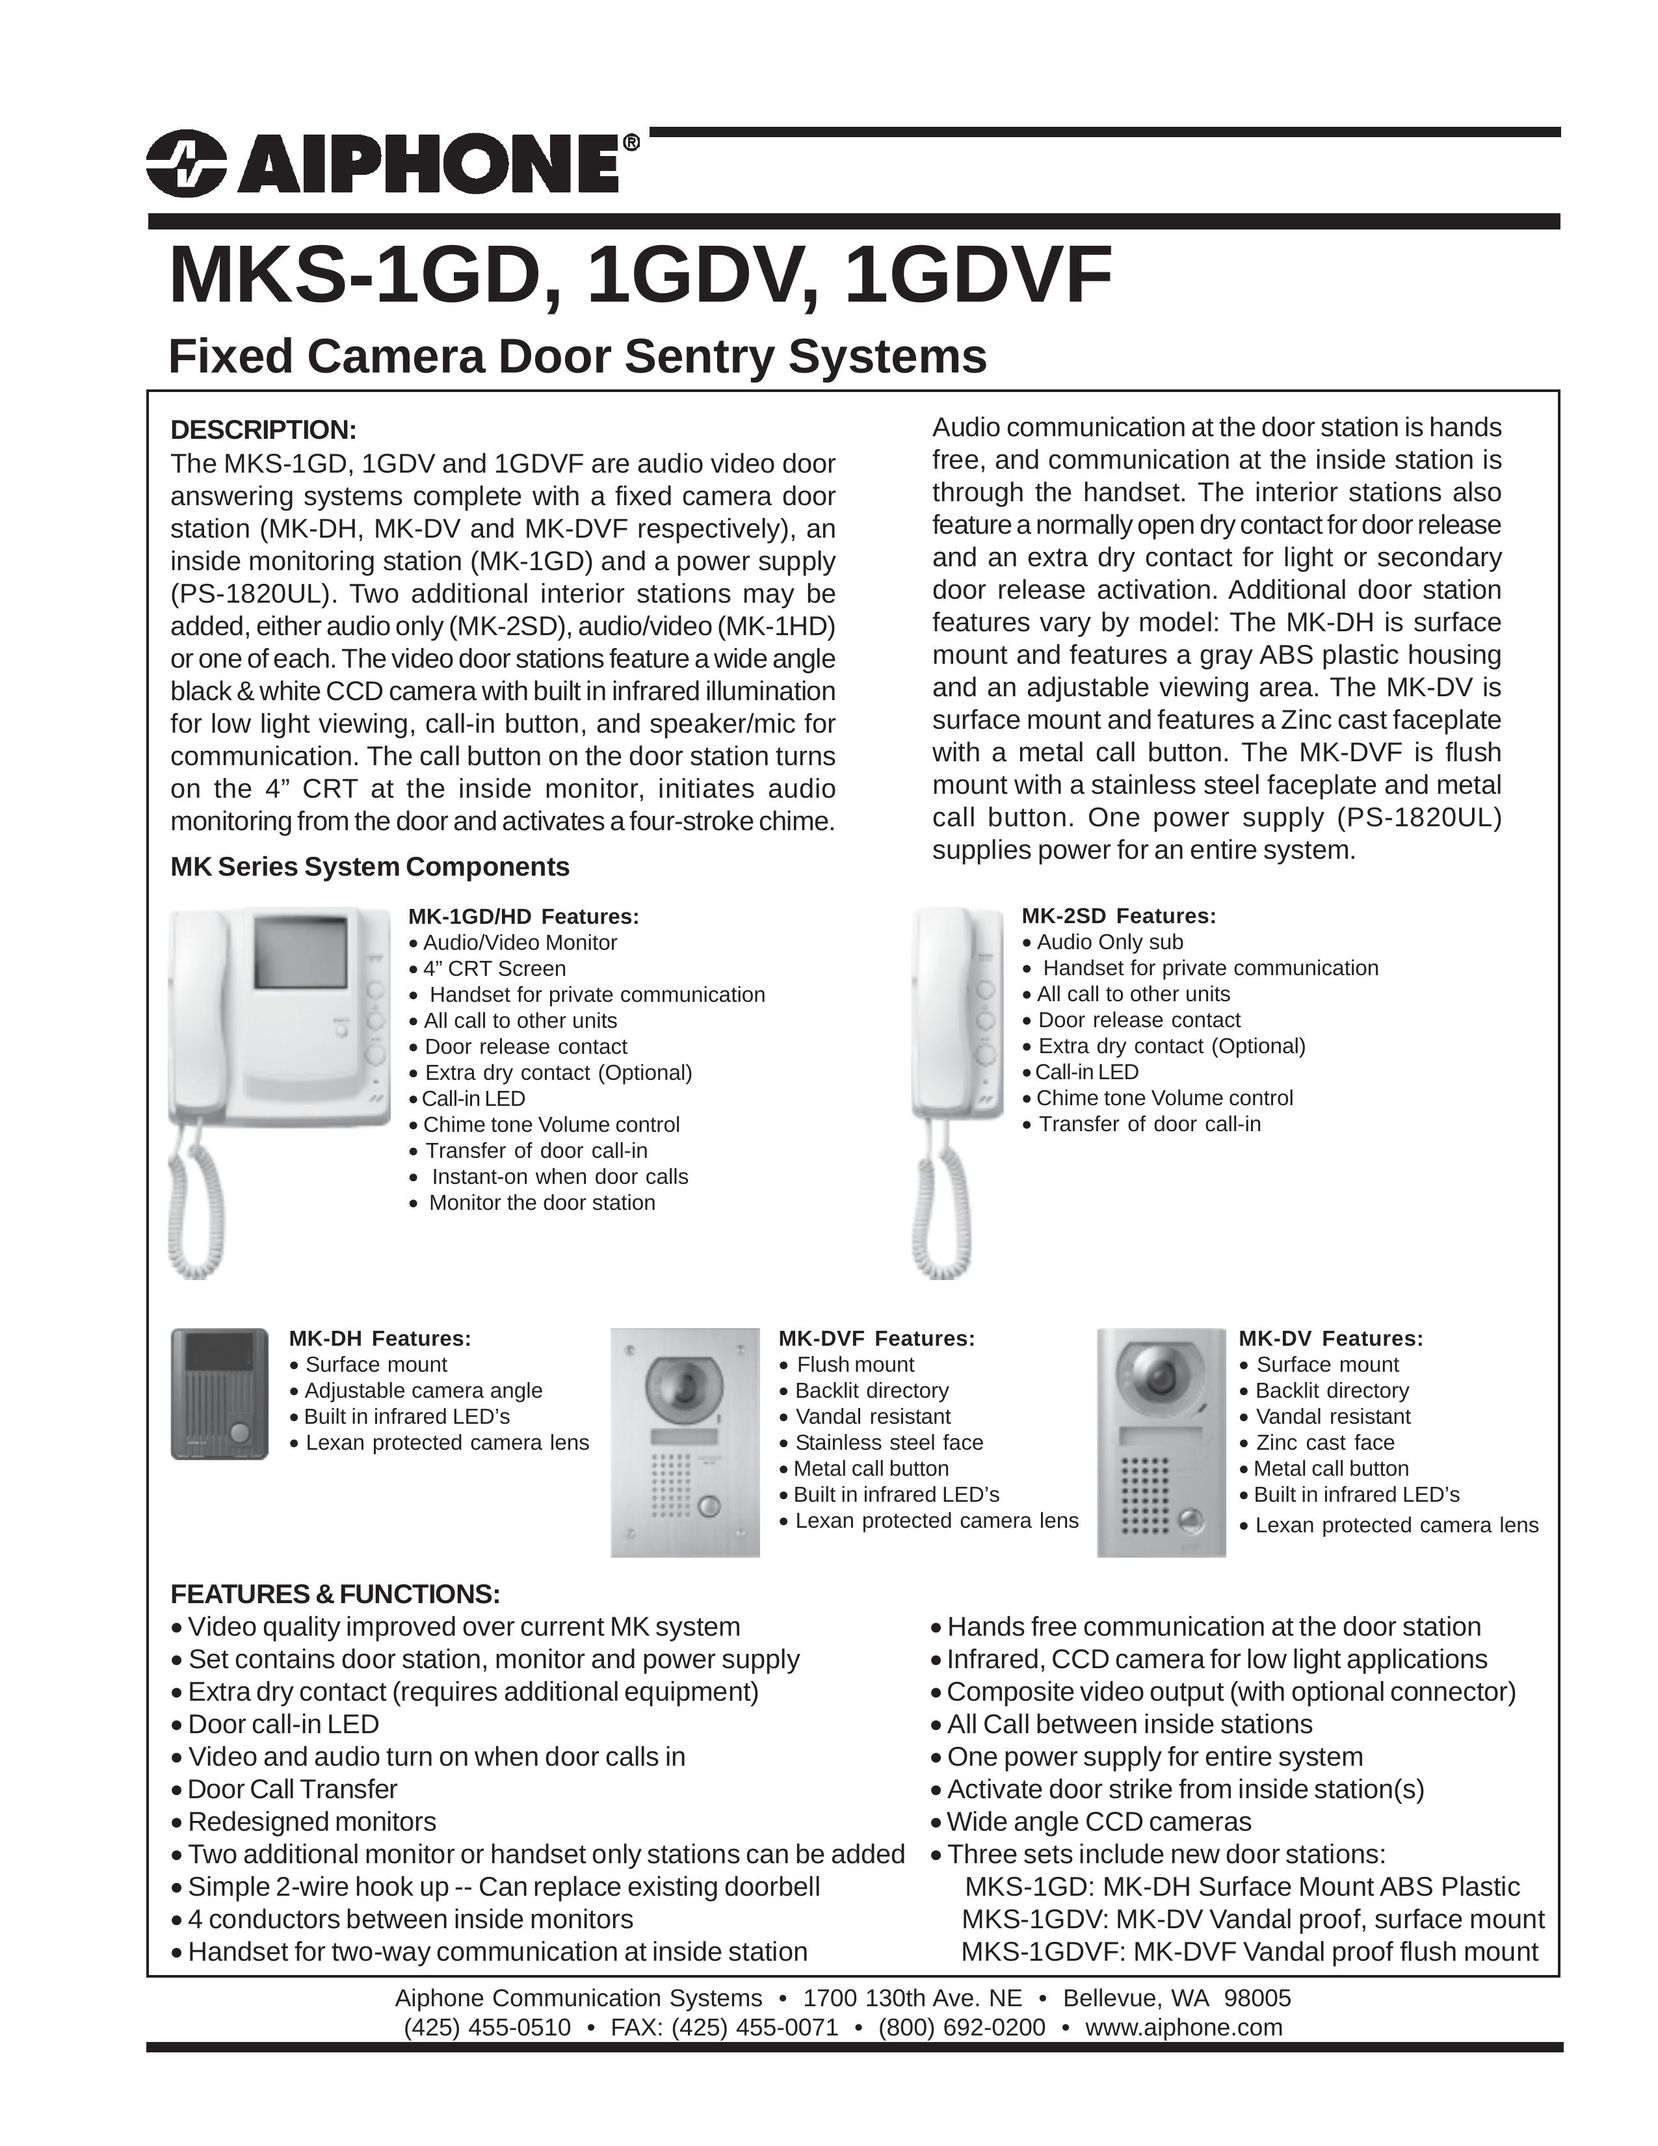 Aiphone 1GDVF Home Security System User Manual